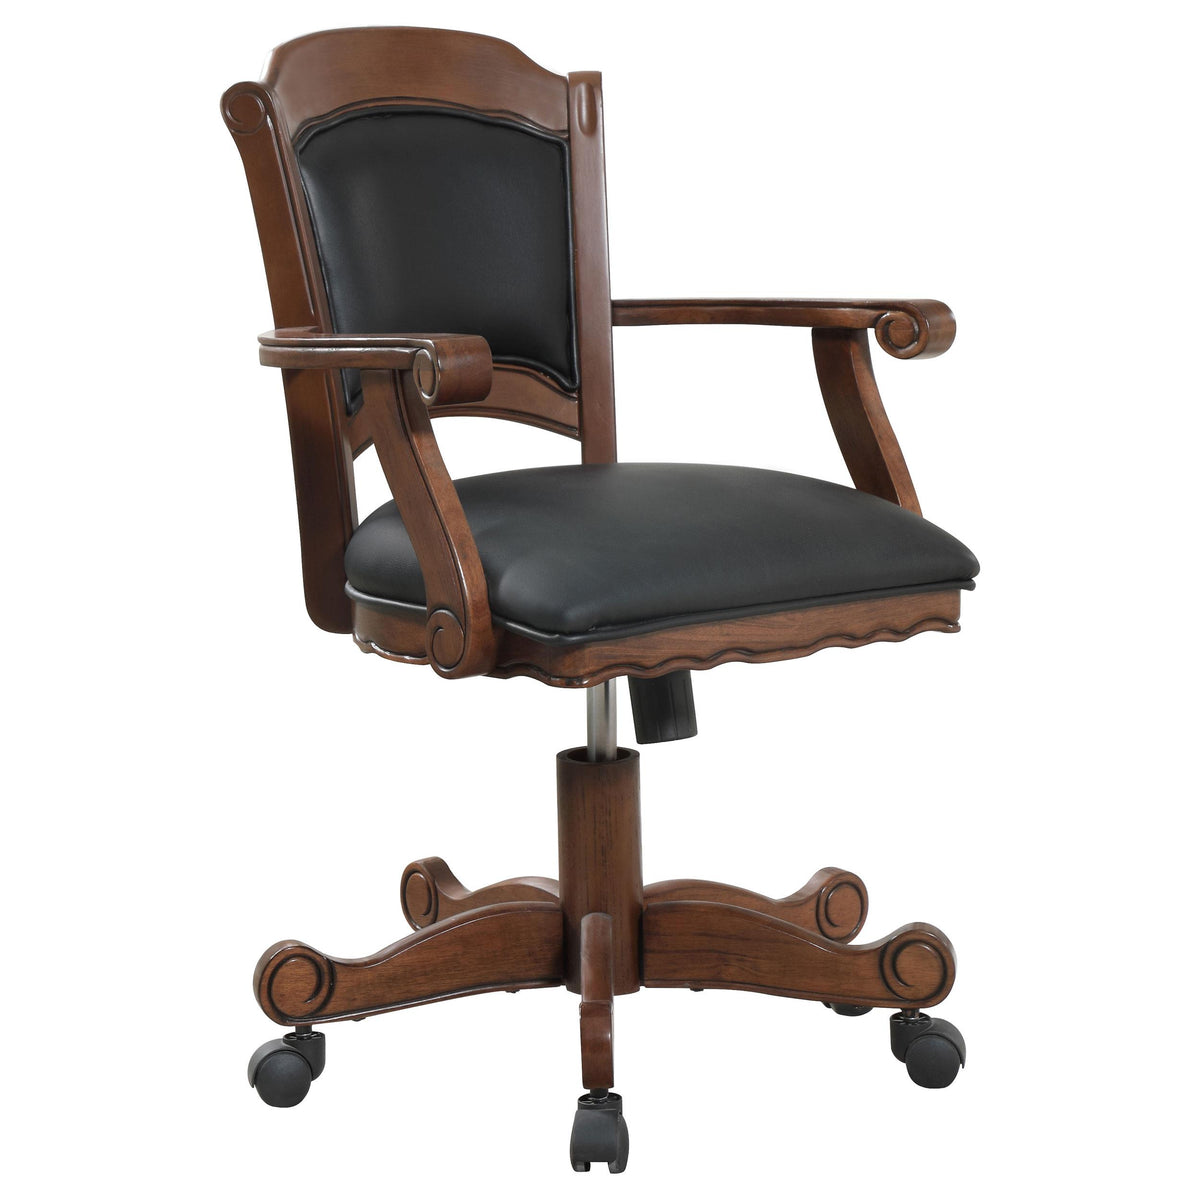 Turk Game Chair with Casters Black and Tobacco  Half Price Furniture